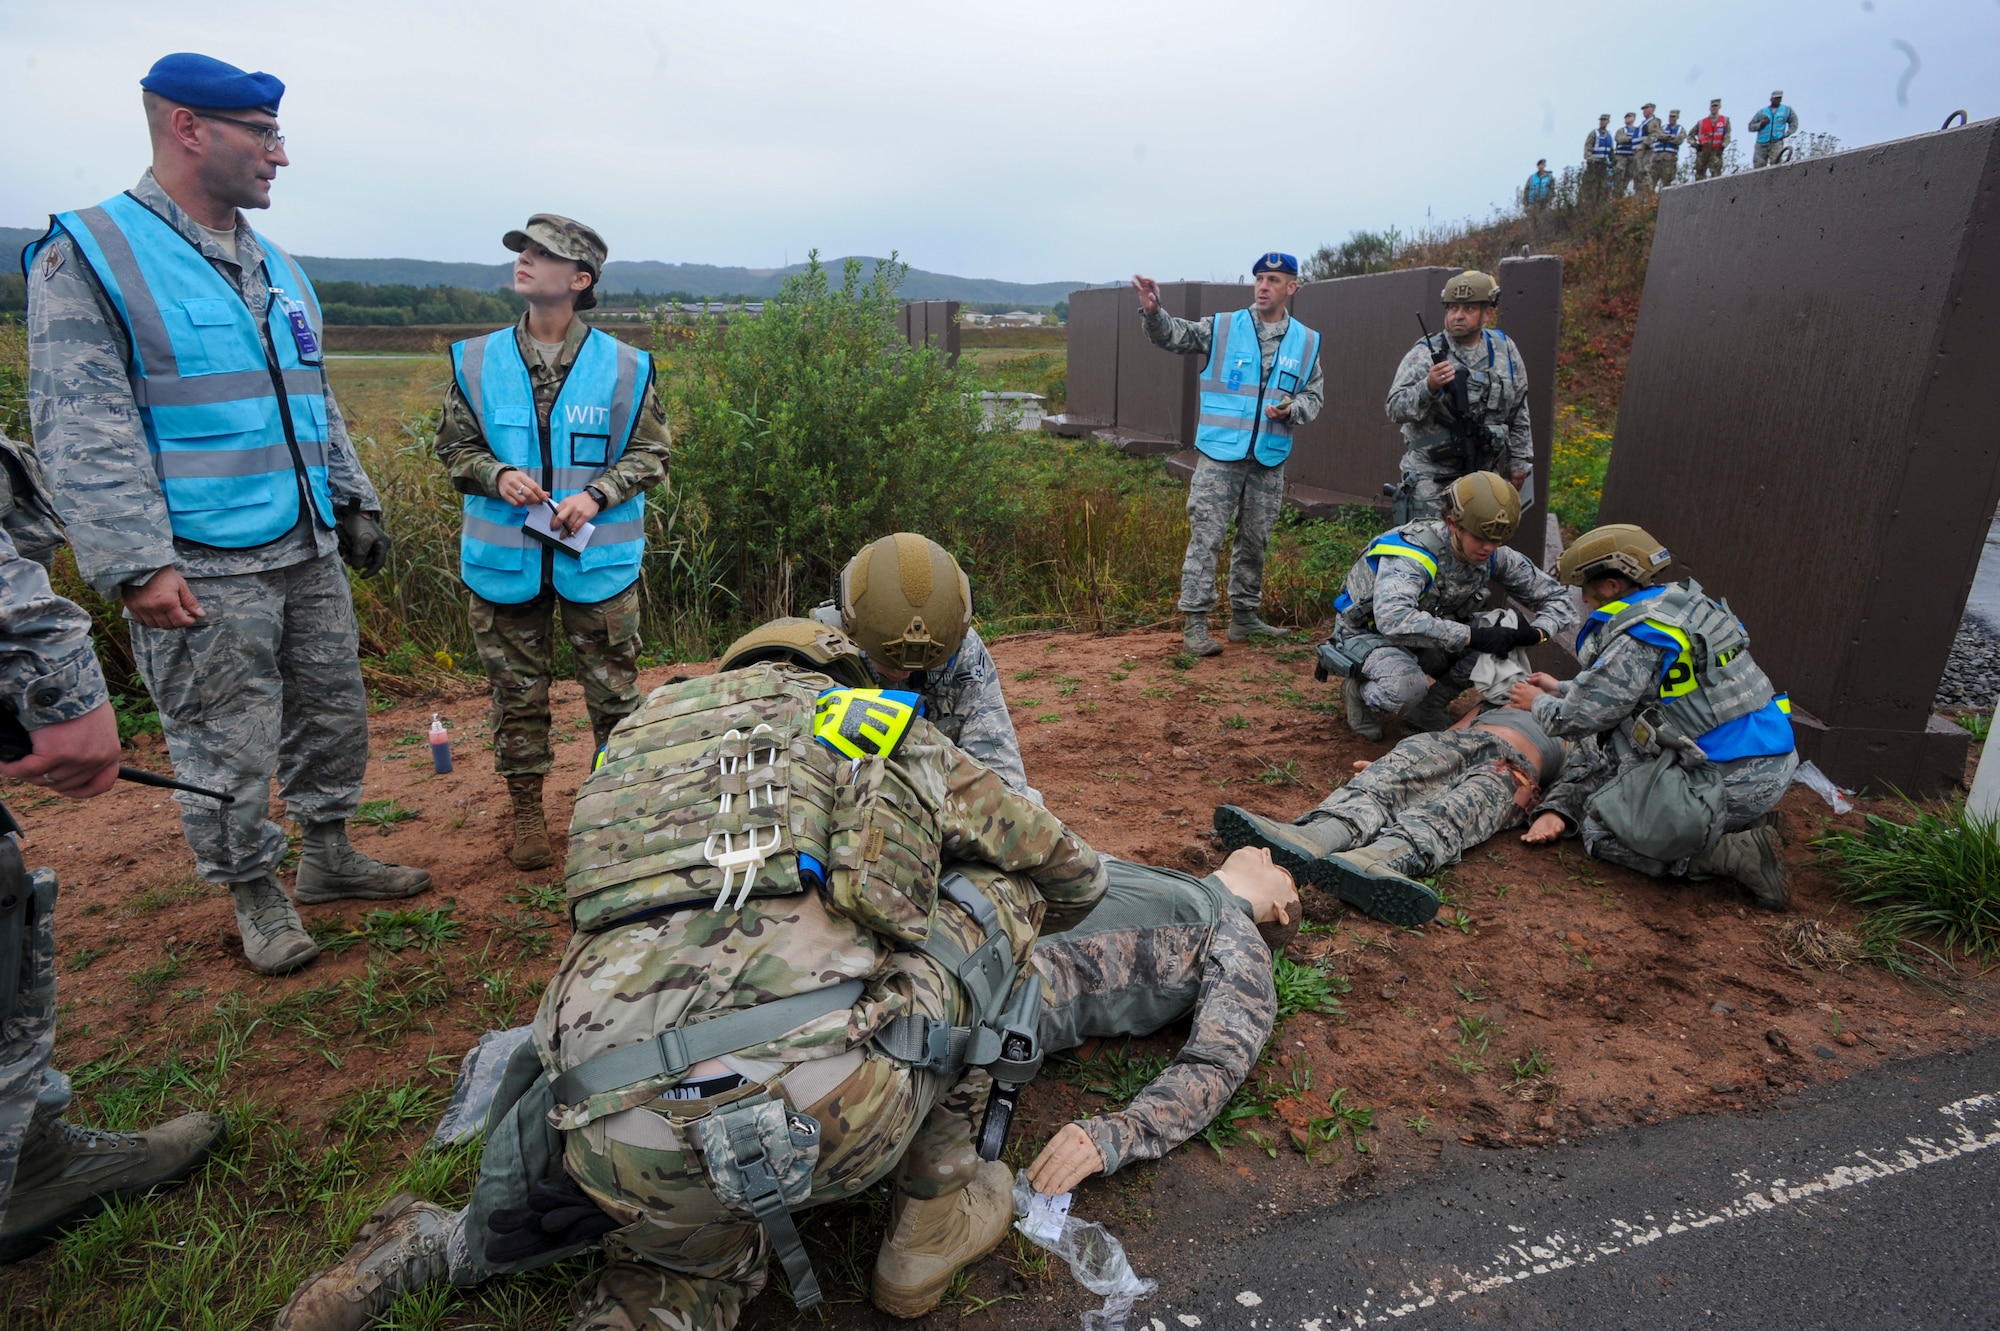 U.S. Airmen assigned to the 86th Security Forces Squadron perform self aid and buddy care procedures during an Operation Varsity 19-03 scenario at Ramstein Air Base, Germany, Sept. 24, 2019. Operation Varsity 19-03 was a weeklong exercise designed to test the capabilities of Ramstein Airmen. (U.S. Air Force photo by Tech. Sgt. Timothy Moore)